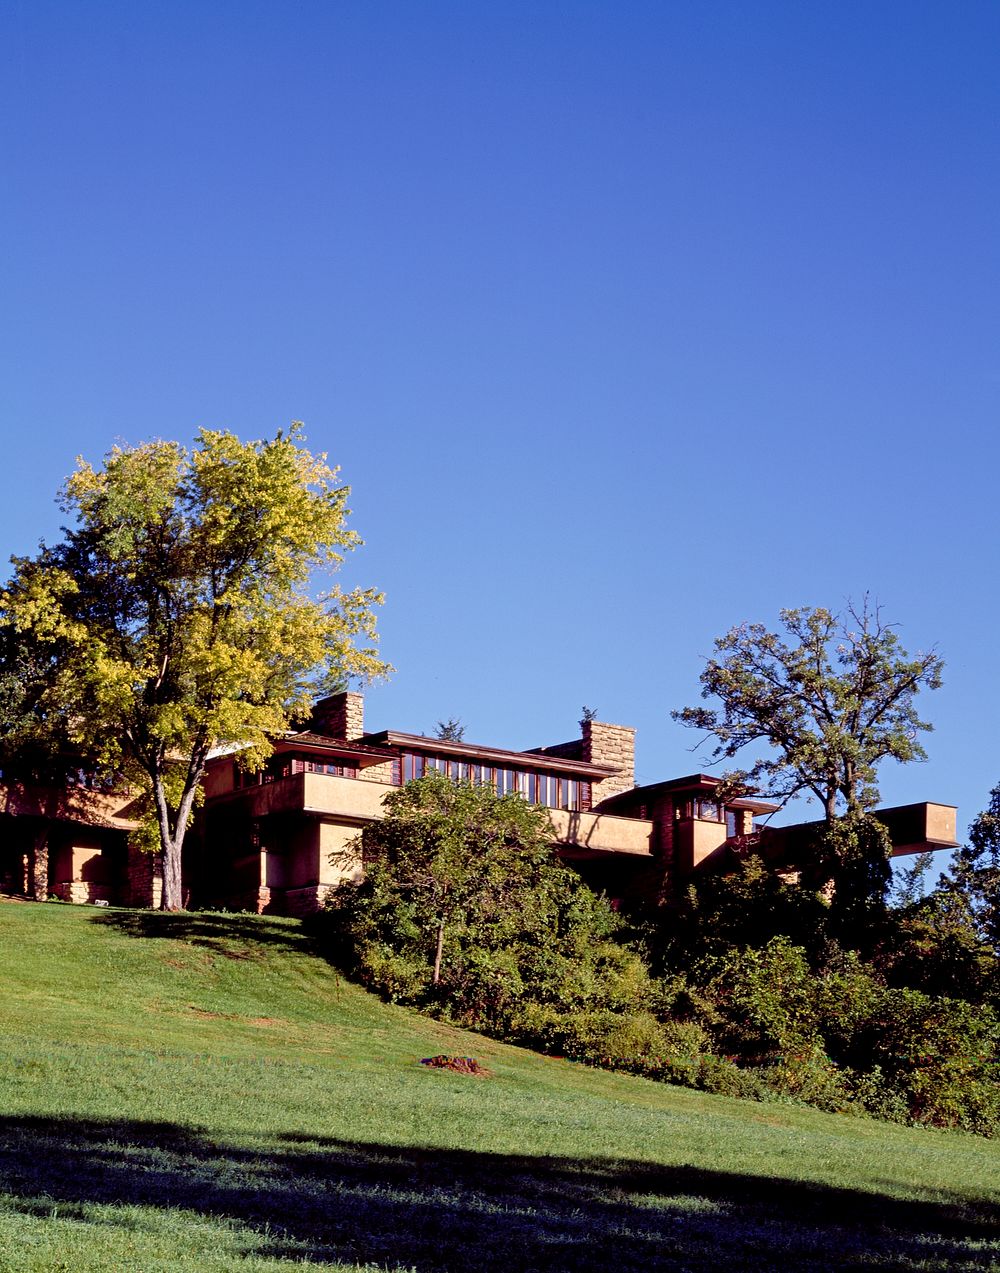 Taliesin the natural house in Wisconsin. Original image from Carol M. Highsmith&rsquo;s America, Library of Congress…